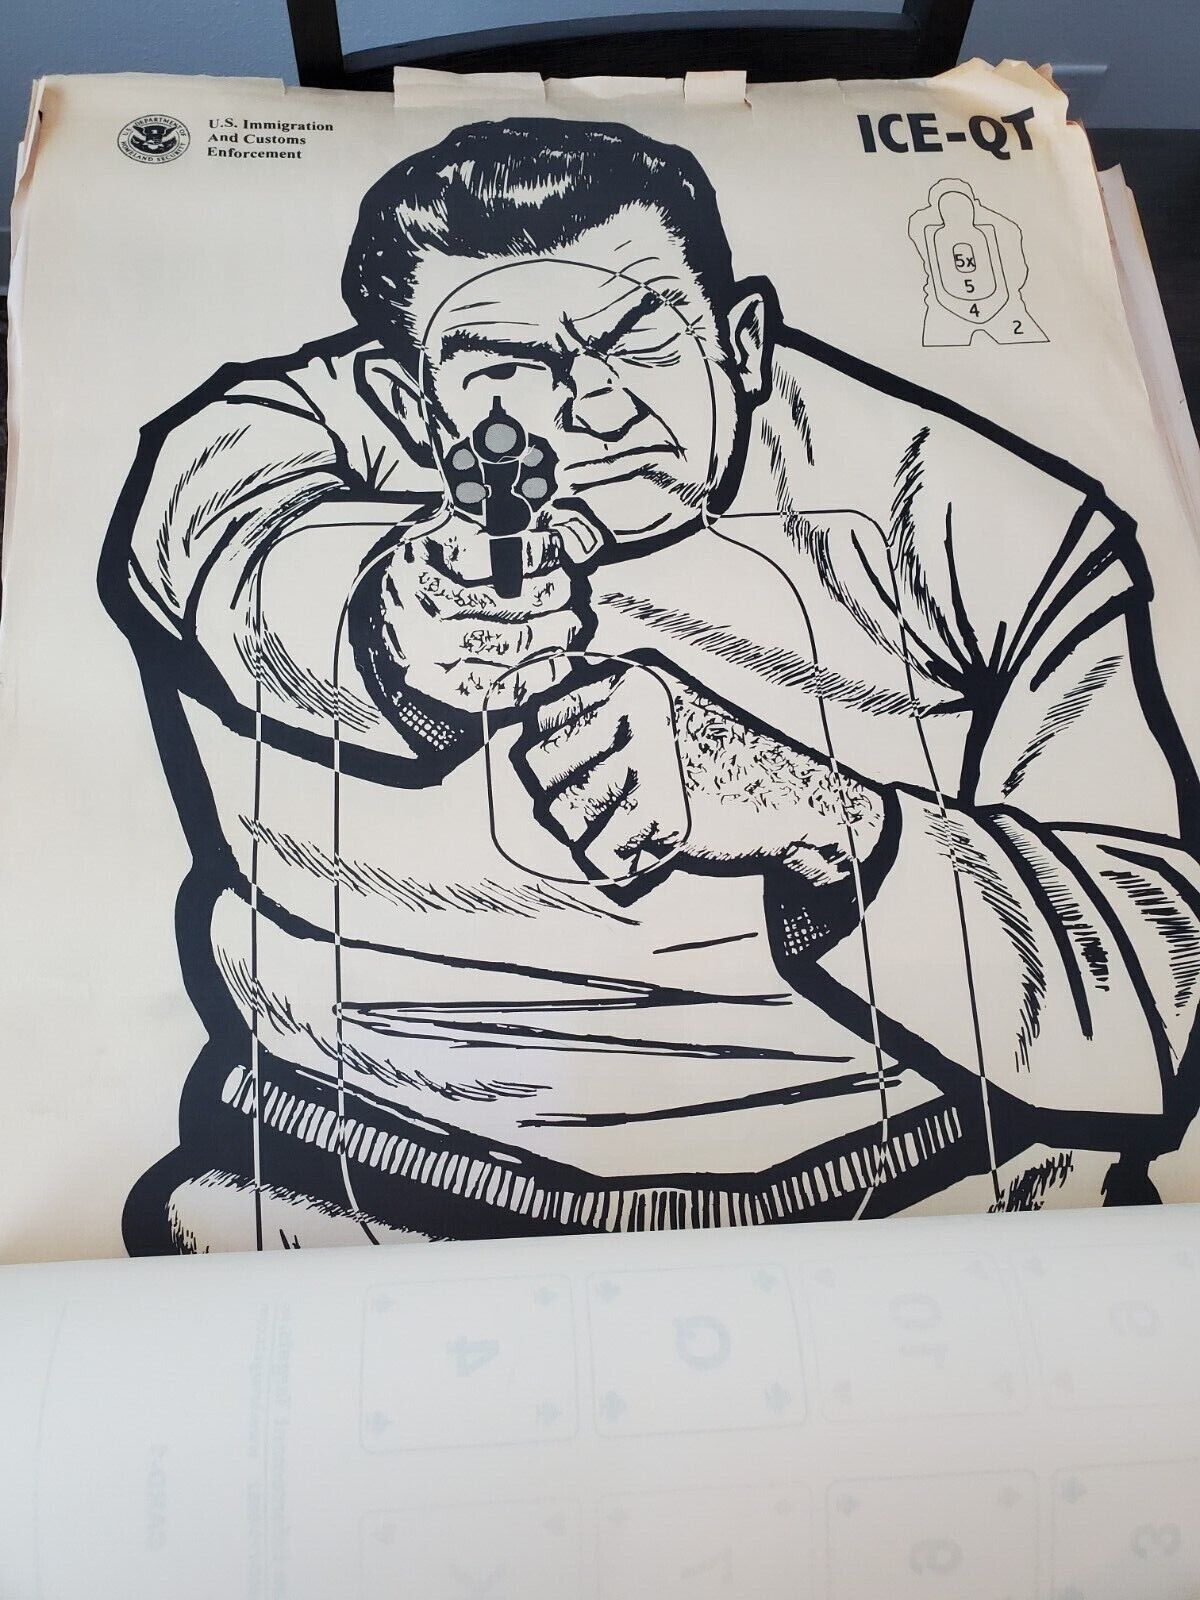 Vintage US Immigration and customs shooting targets